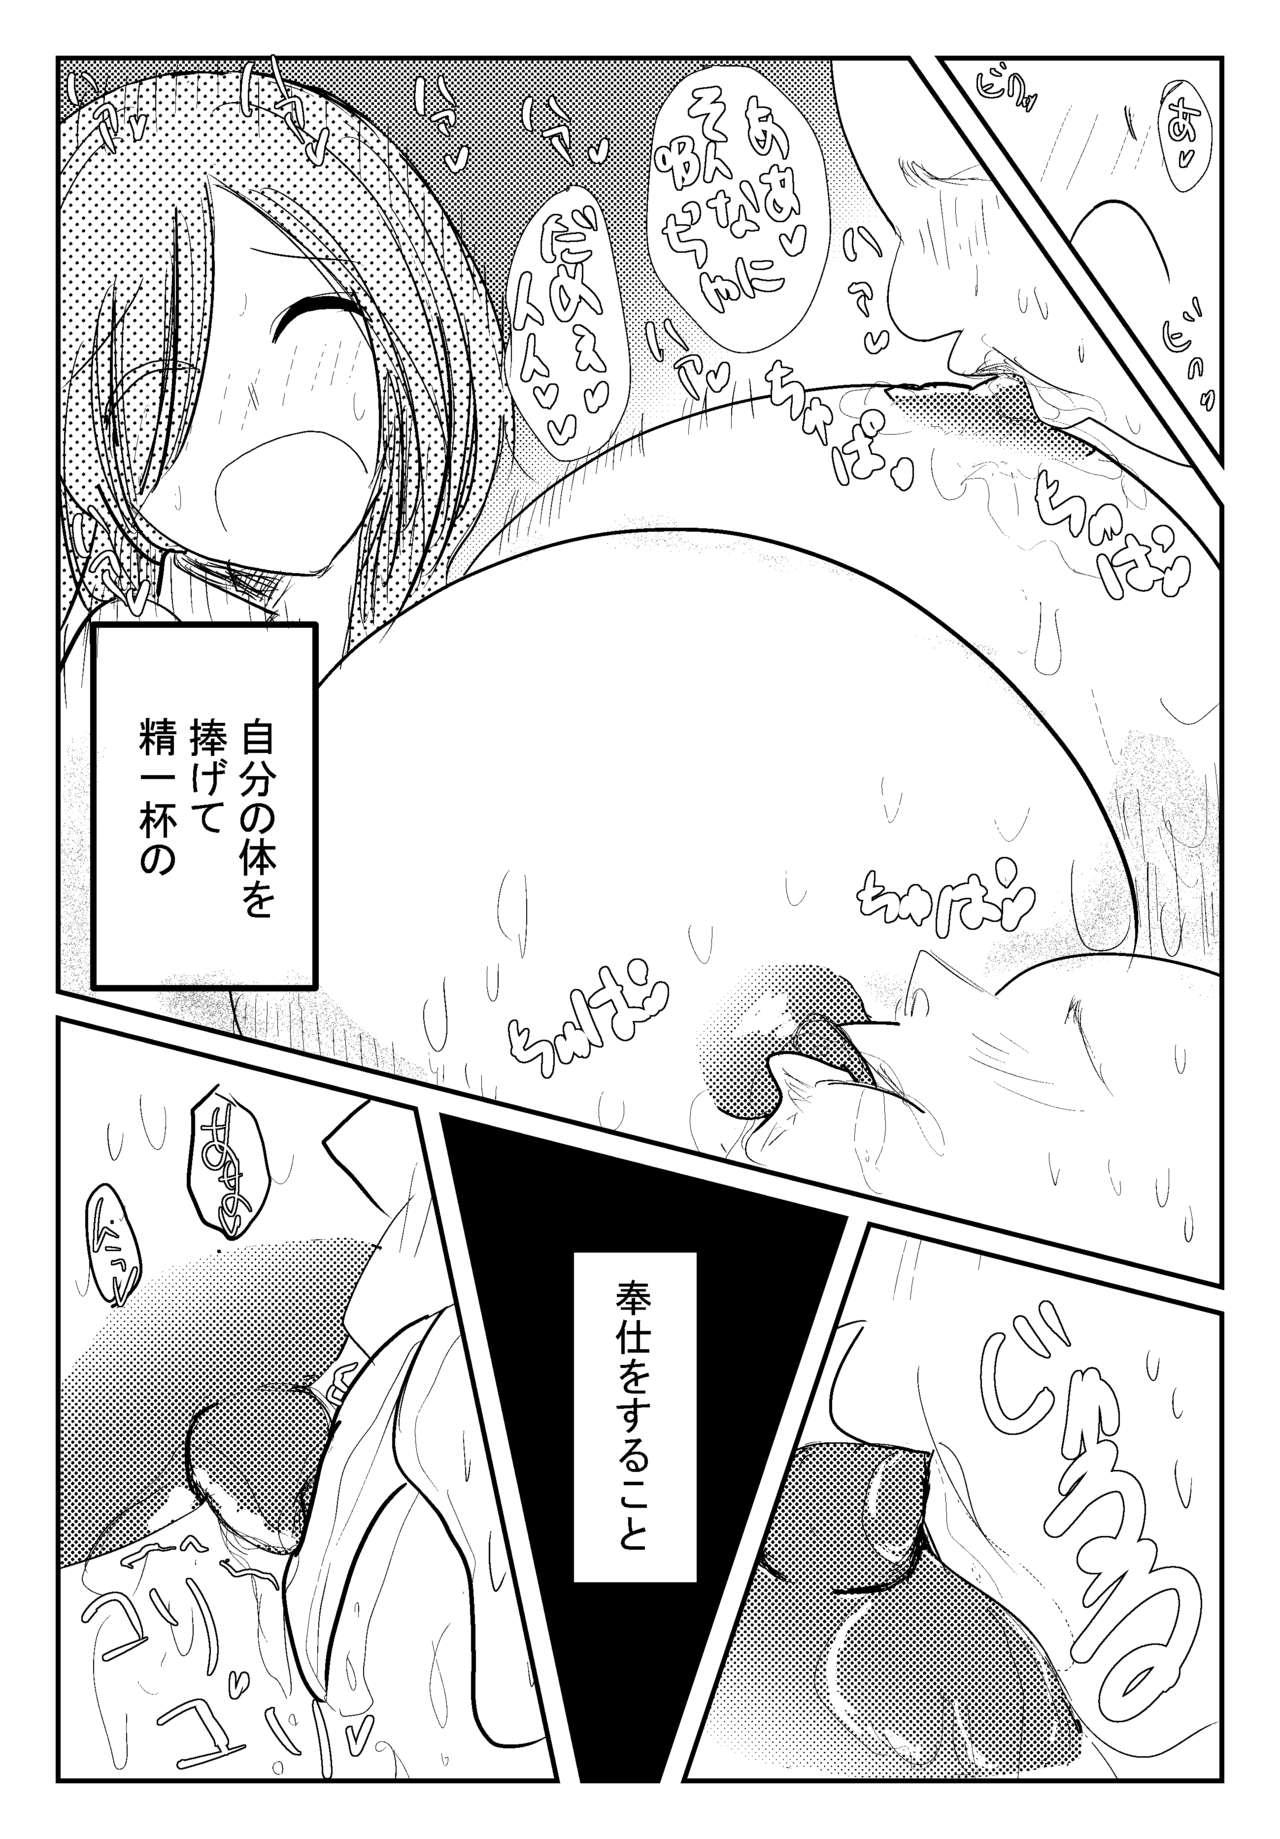 She 両乳首吸われて喘いじゃう爆乳OL Cumload - Page 4